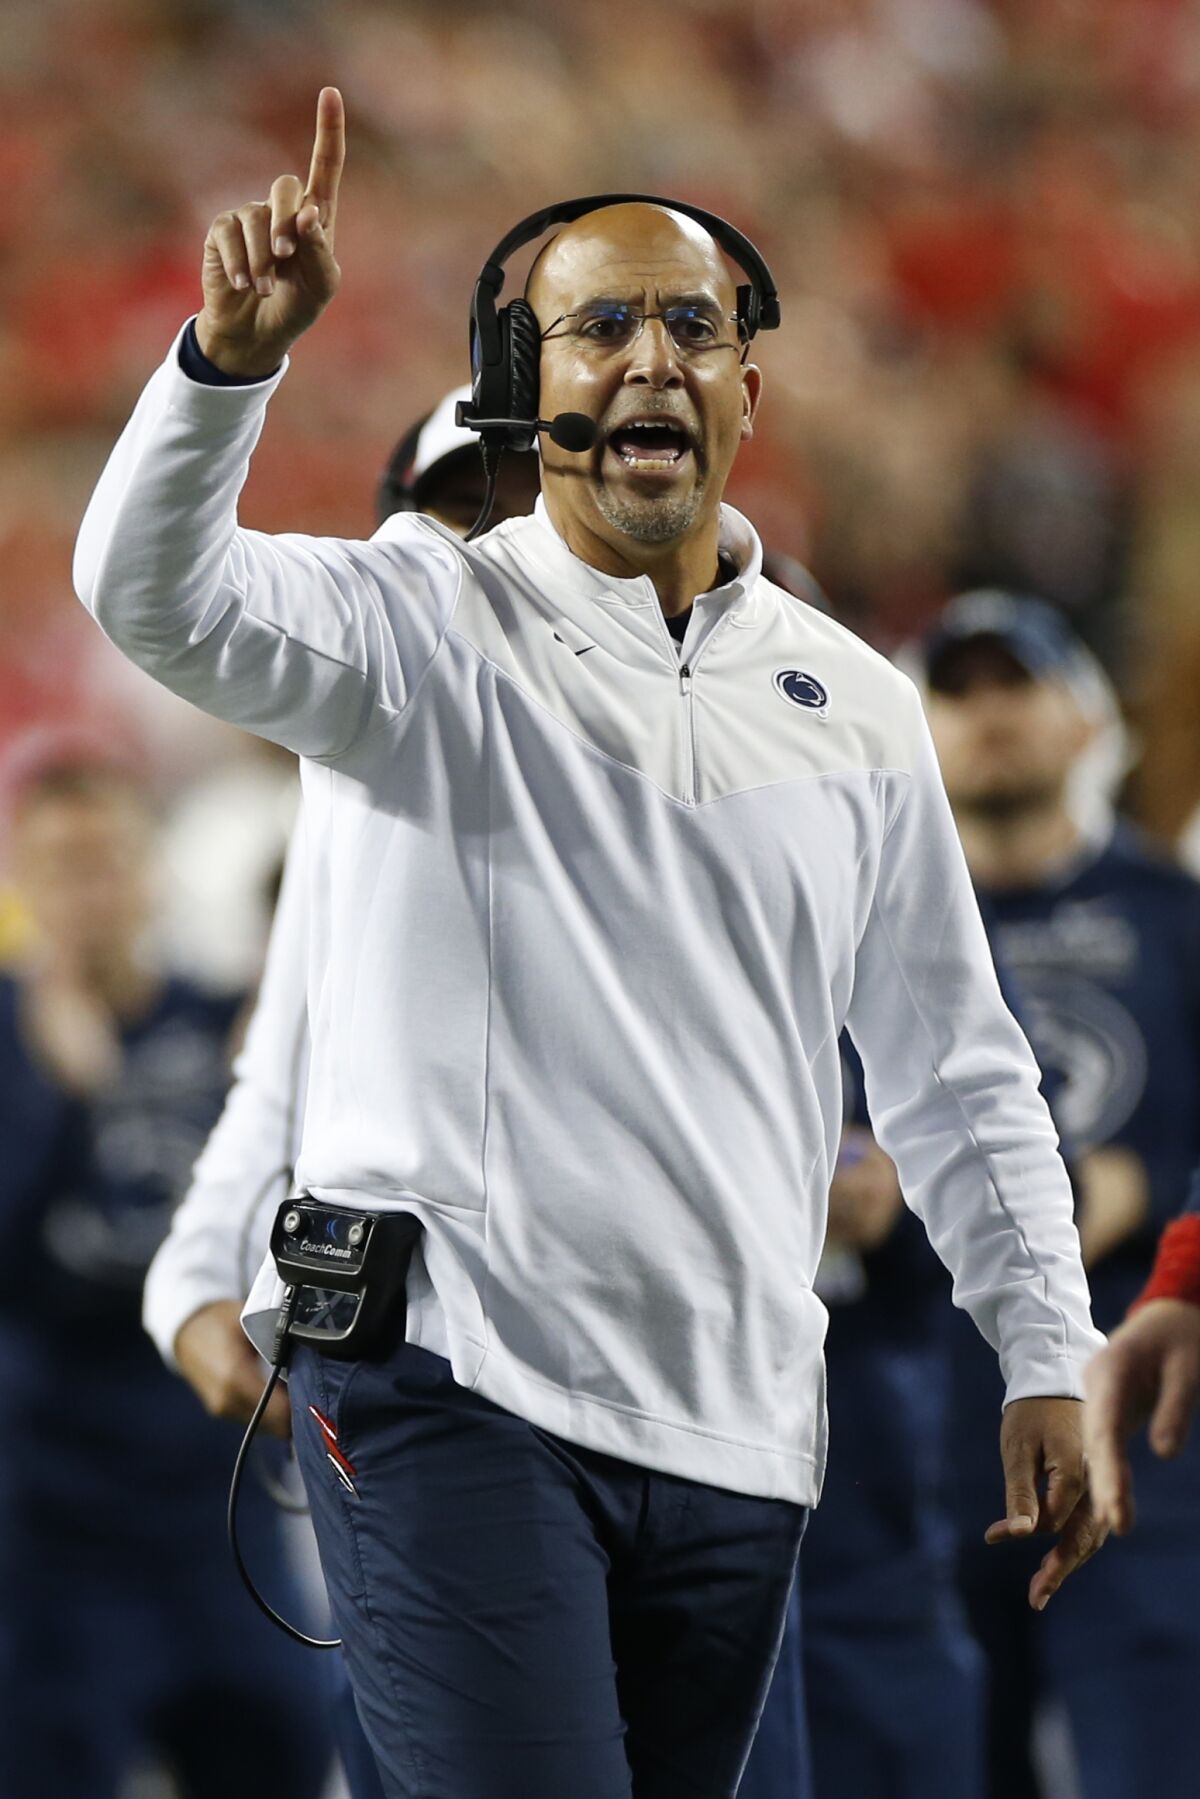 Penn State coach James Franklin signals to his team during the second half of an NCAA college football game against Ohio State on Saturday, Oct. 30, 2021, in Columbus, Ohio. (AP Photo/Jay LaPrete)